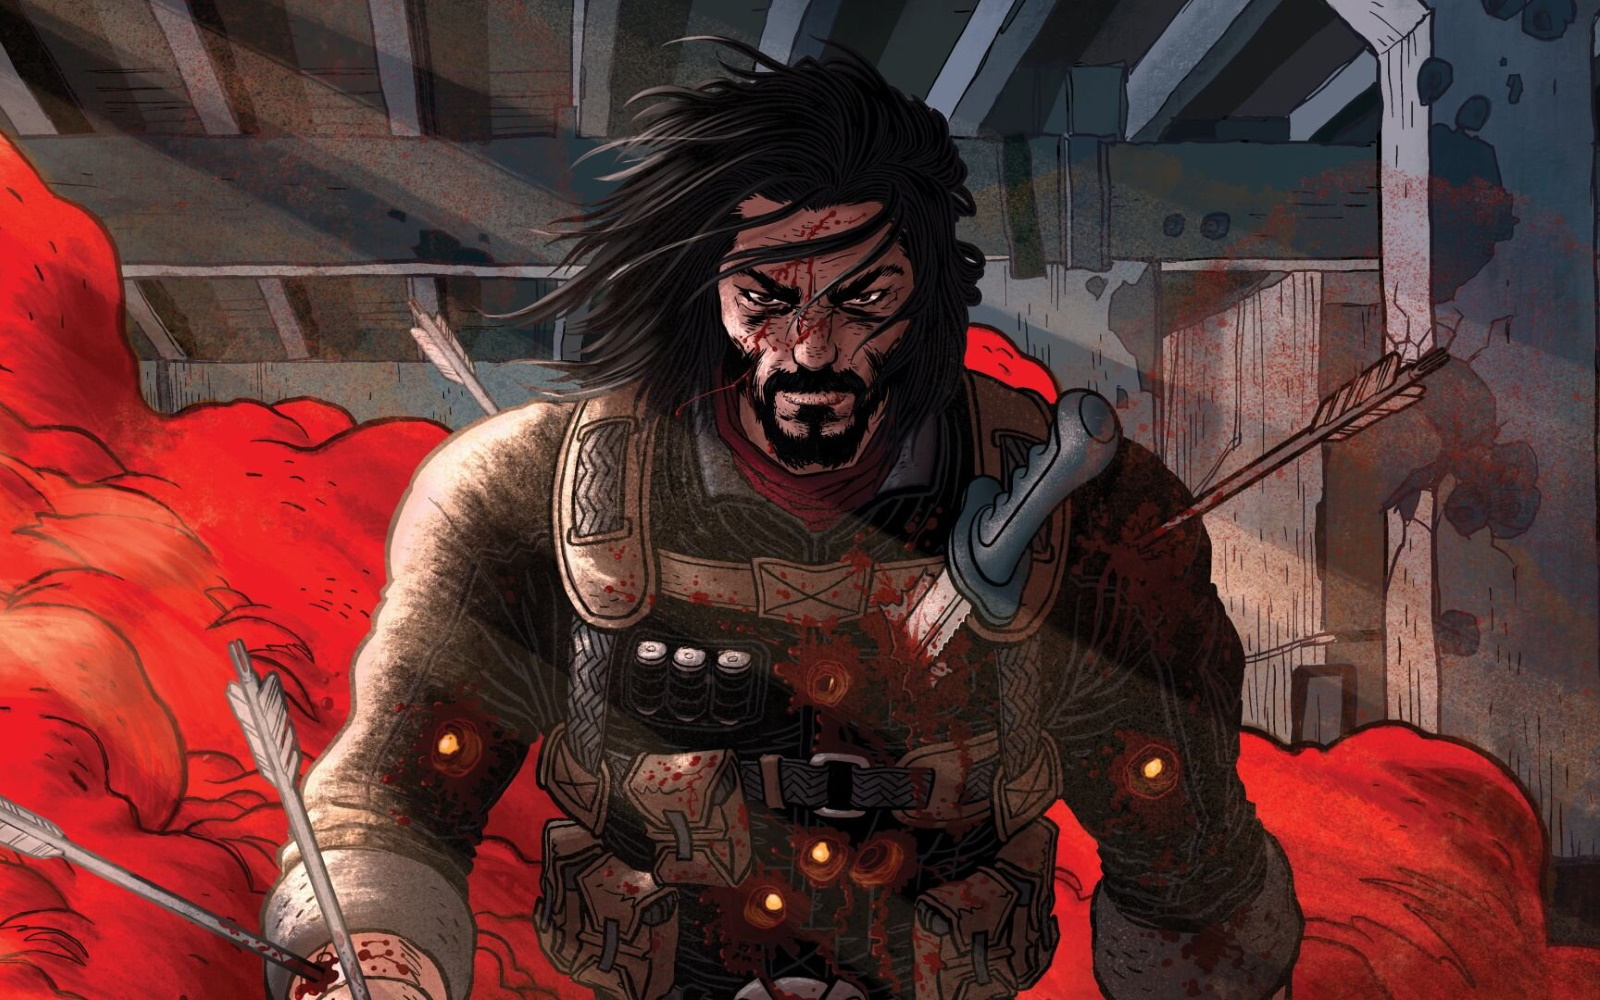 A New Graphic Novel Series, Co-Written By Keanu Reeves Called BRZRKR, Smashes Kickstarter Goal